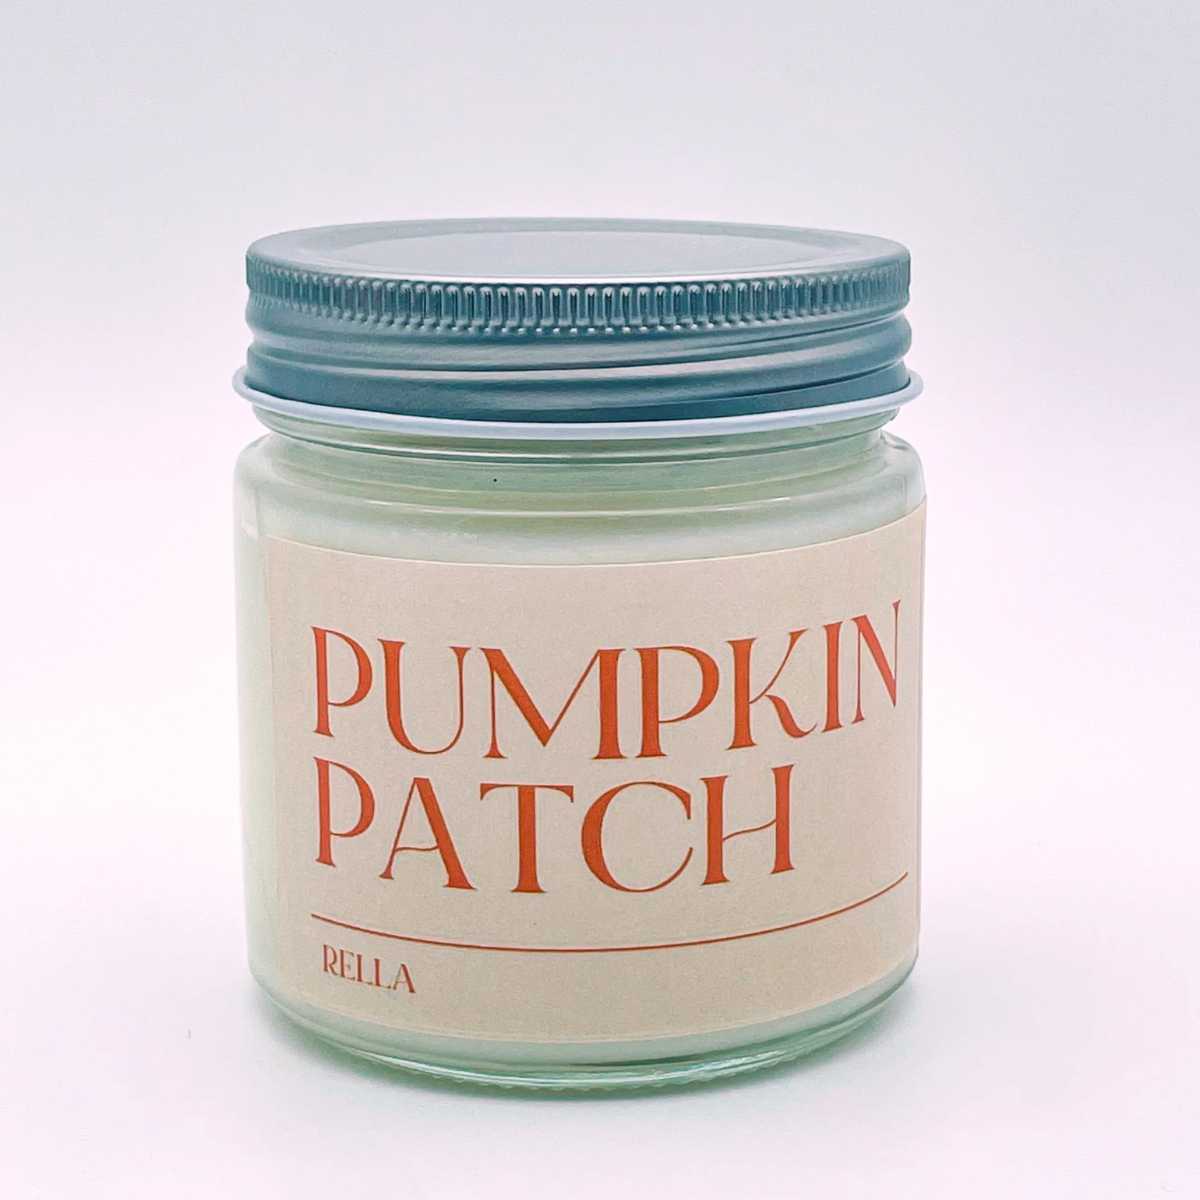 Pumpkin Patch: Pumpkin Spice Scented Soy Wax Candle